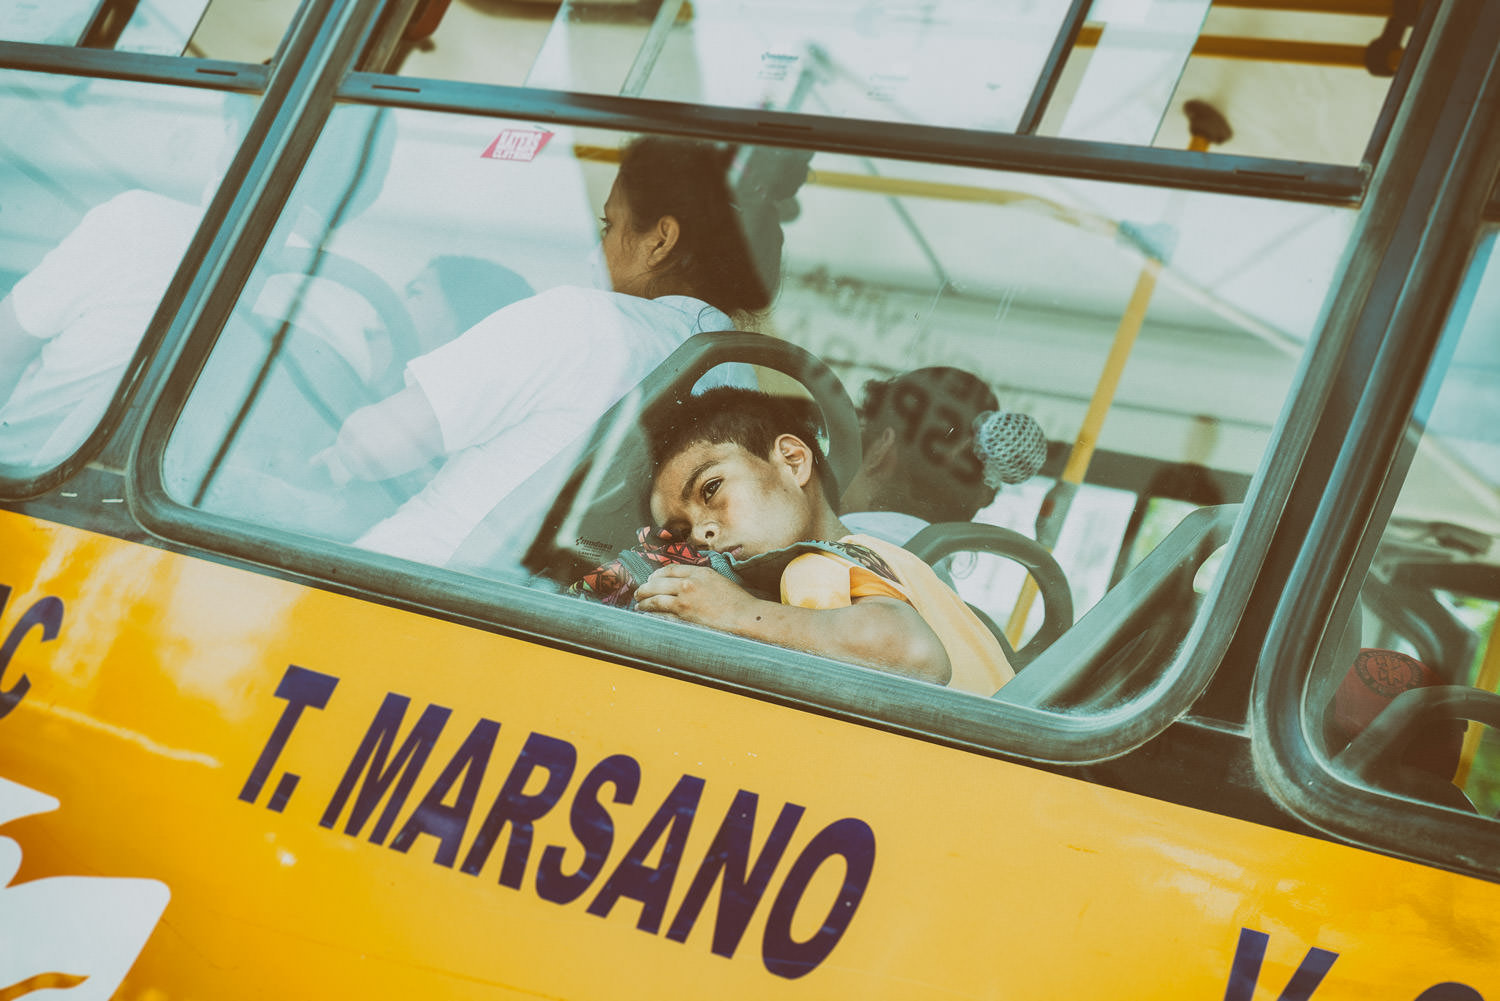 Afternoon Ride - Lima, Peru, South America, bus, child, travel